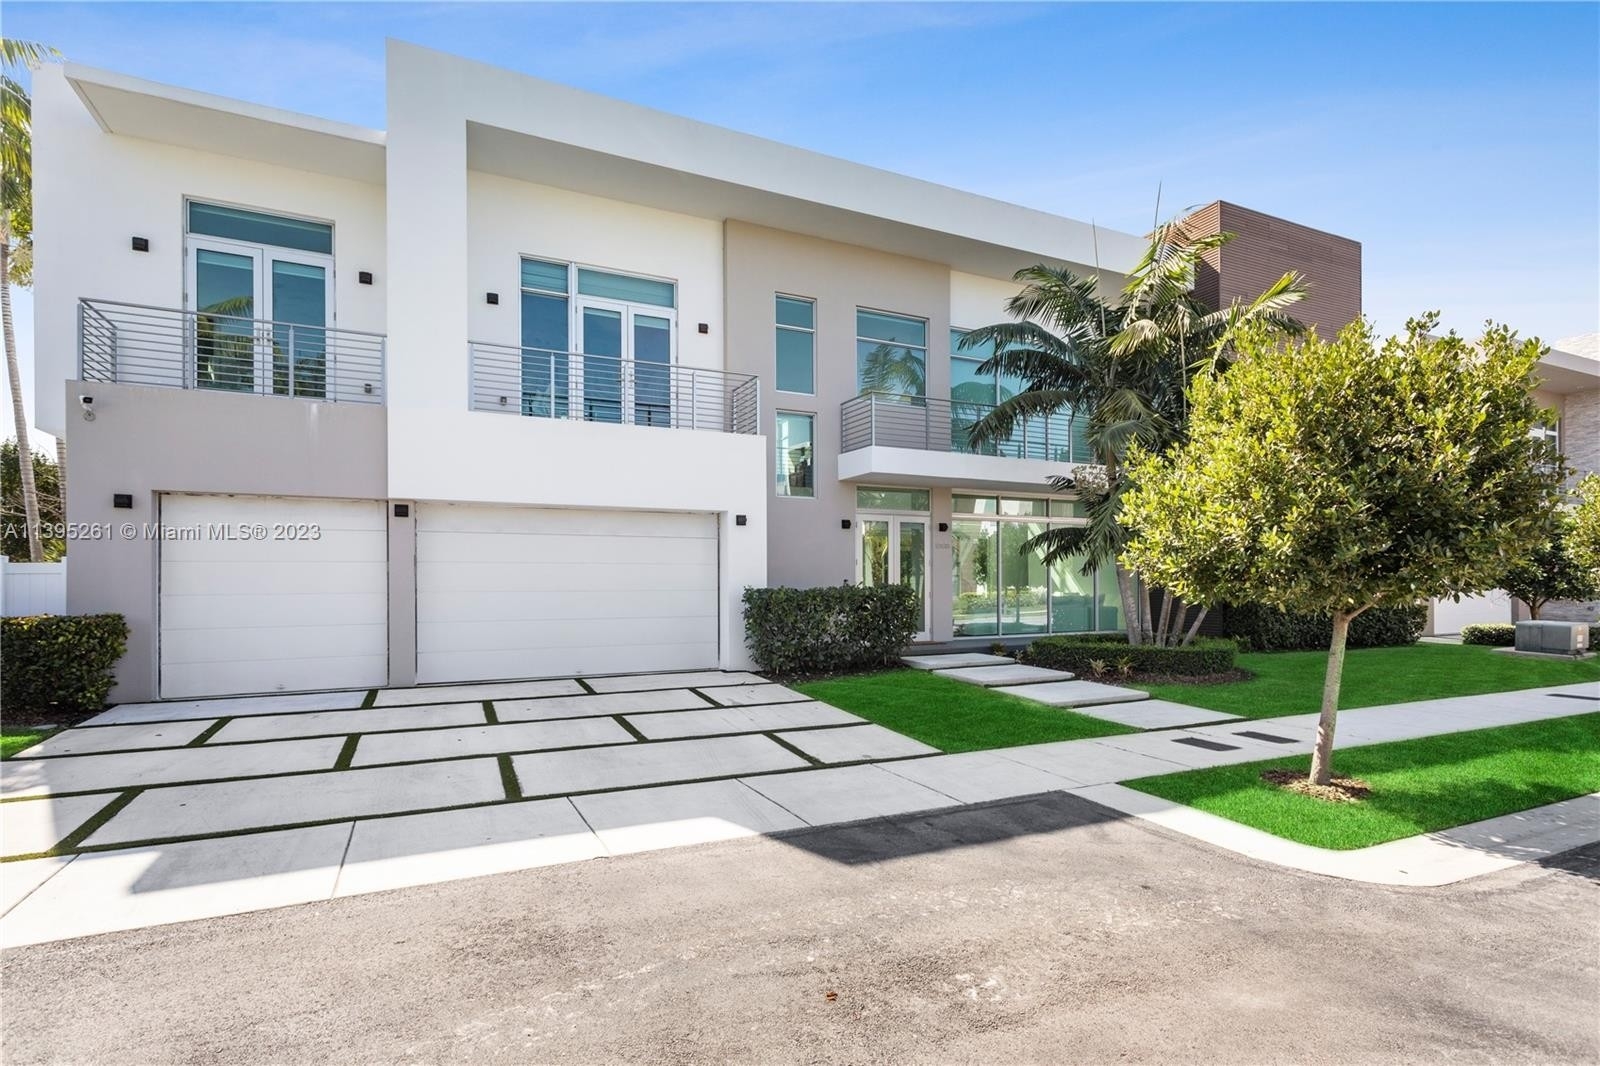 Single Family Home for Sale at Doral, FL 33178